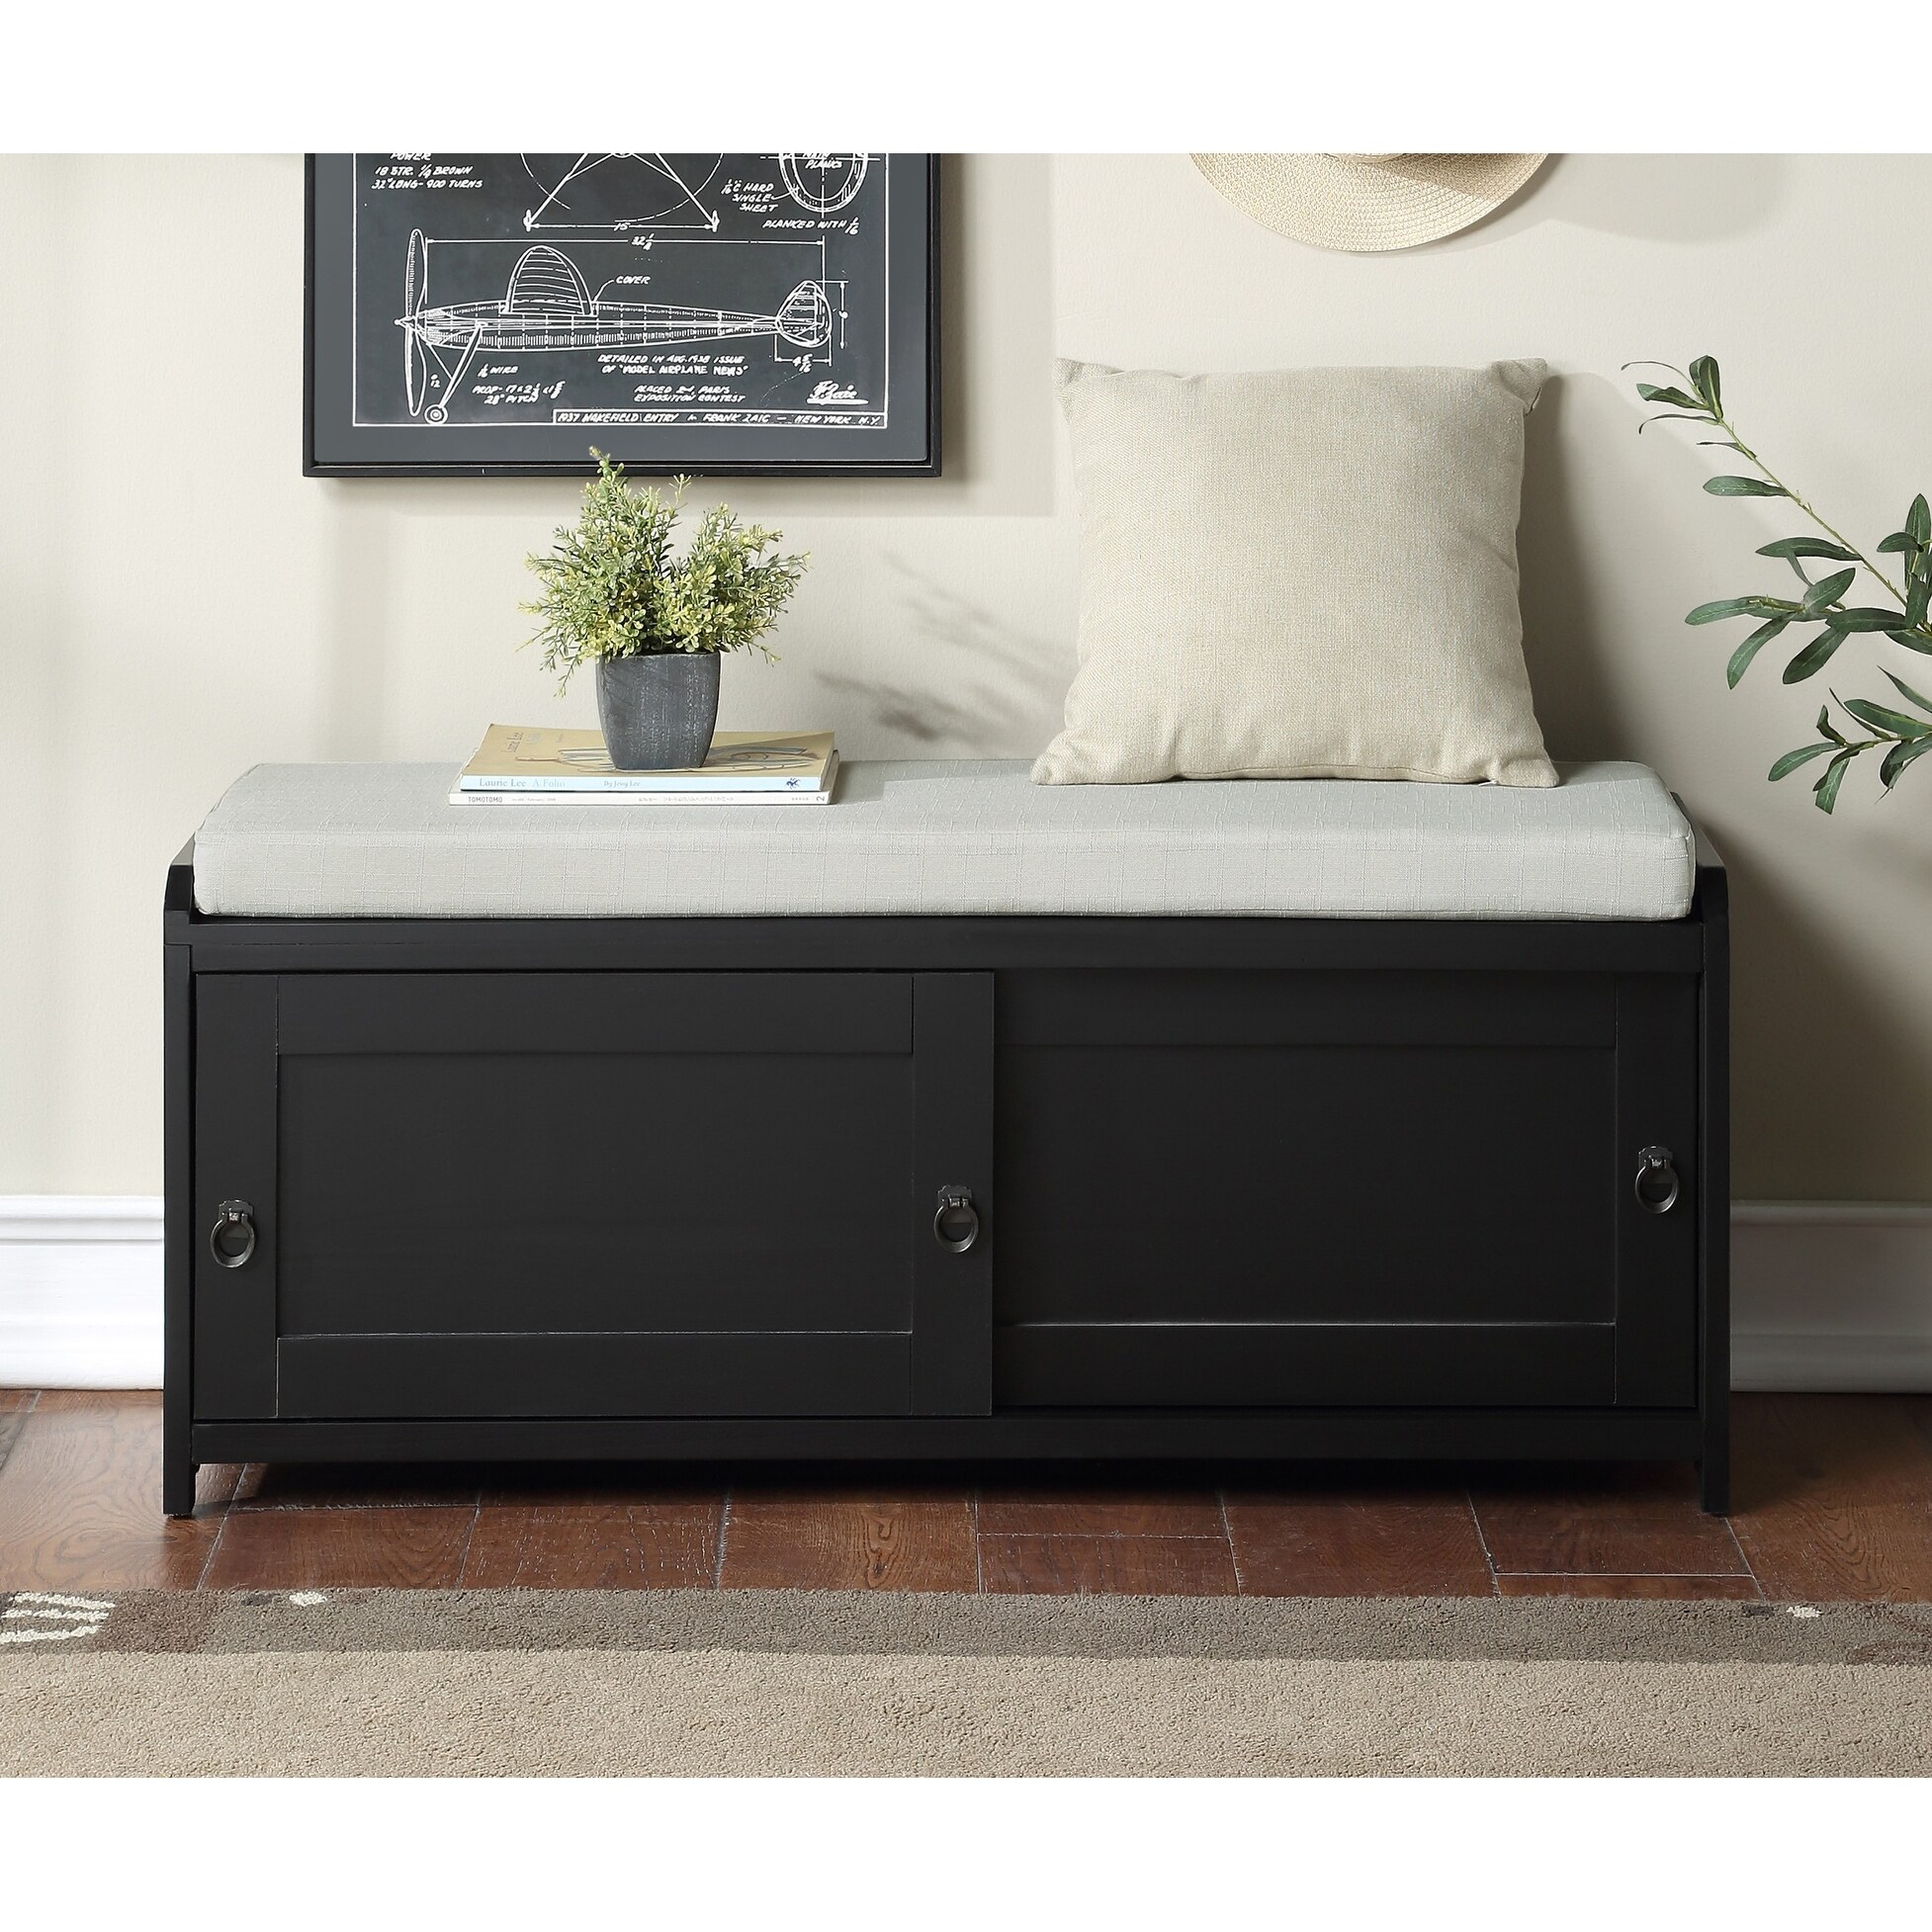 https://ak1.ostkcdn.com/images/products/is/images/direct/fdf05d5d89462b53df4dd1040623141721a878c8/Wood-Entryway-Storage-Bench-with-2-Cabinets-by-TiramisuBest-3-Colors.jpg